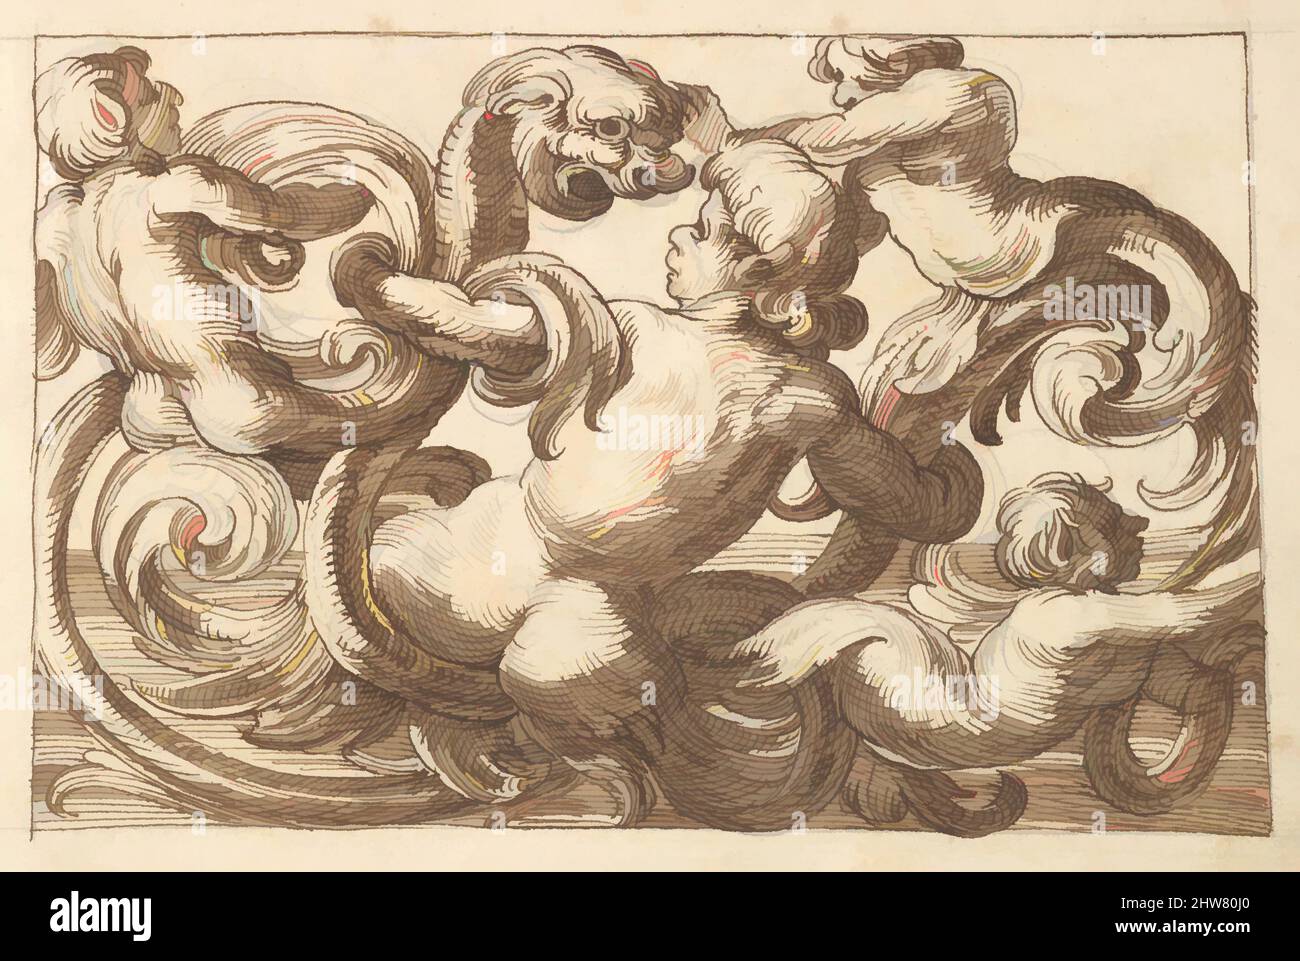 Art inspired by Horizontal Panel Design with Four Hybrid Male Figures and a Fantastical Creature Interspersed between Acanthus Rinceaux, 17th century (first half), Pen and brown ink over leadpoint., Sheet: 7 1/4 x 10 5/16 in. (18.4 x 26.2 cm), Anonymous, Italian, Venetian, 17th century, Classic works modernized by Artotop with a splash of modernity. Shapes, color and value, eye-catching visual impact on art. Emotions through freedom of artworks in a contemporary way. A timeless message pursuing a wildly creative new direction. Artists turning to the digital medium and creating the Artotop NFT Stock Photo